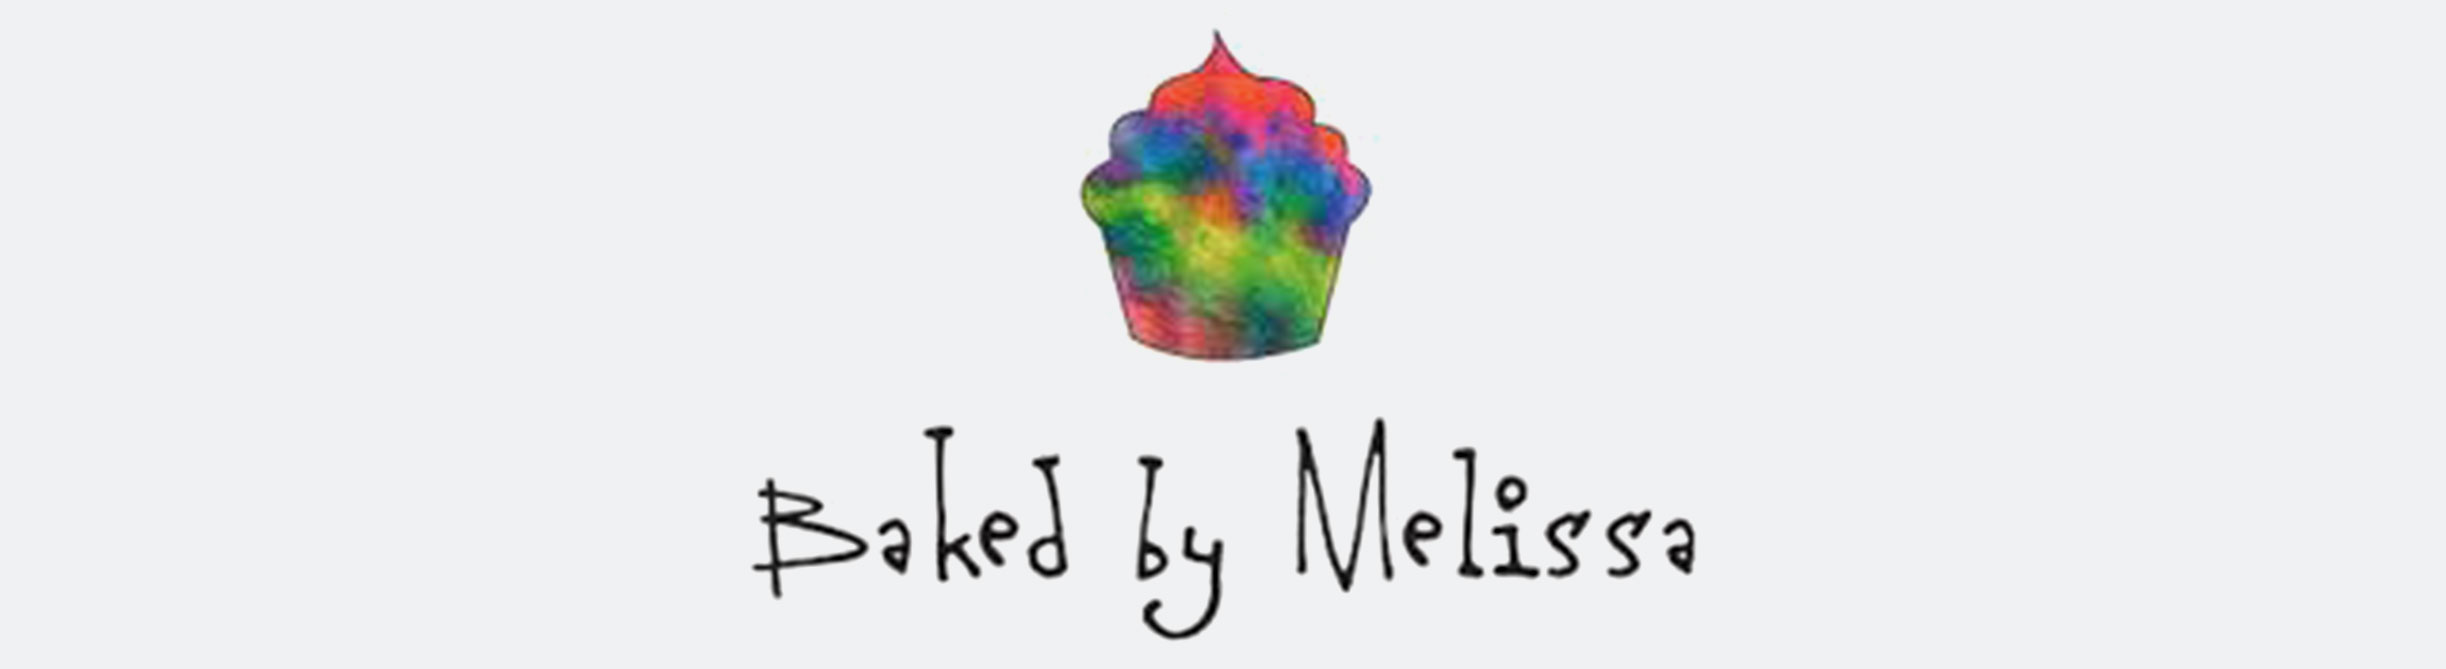 baked-by-melissa